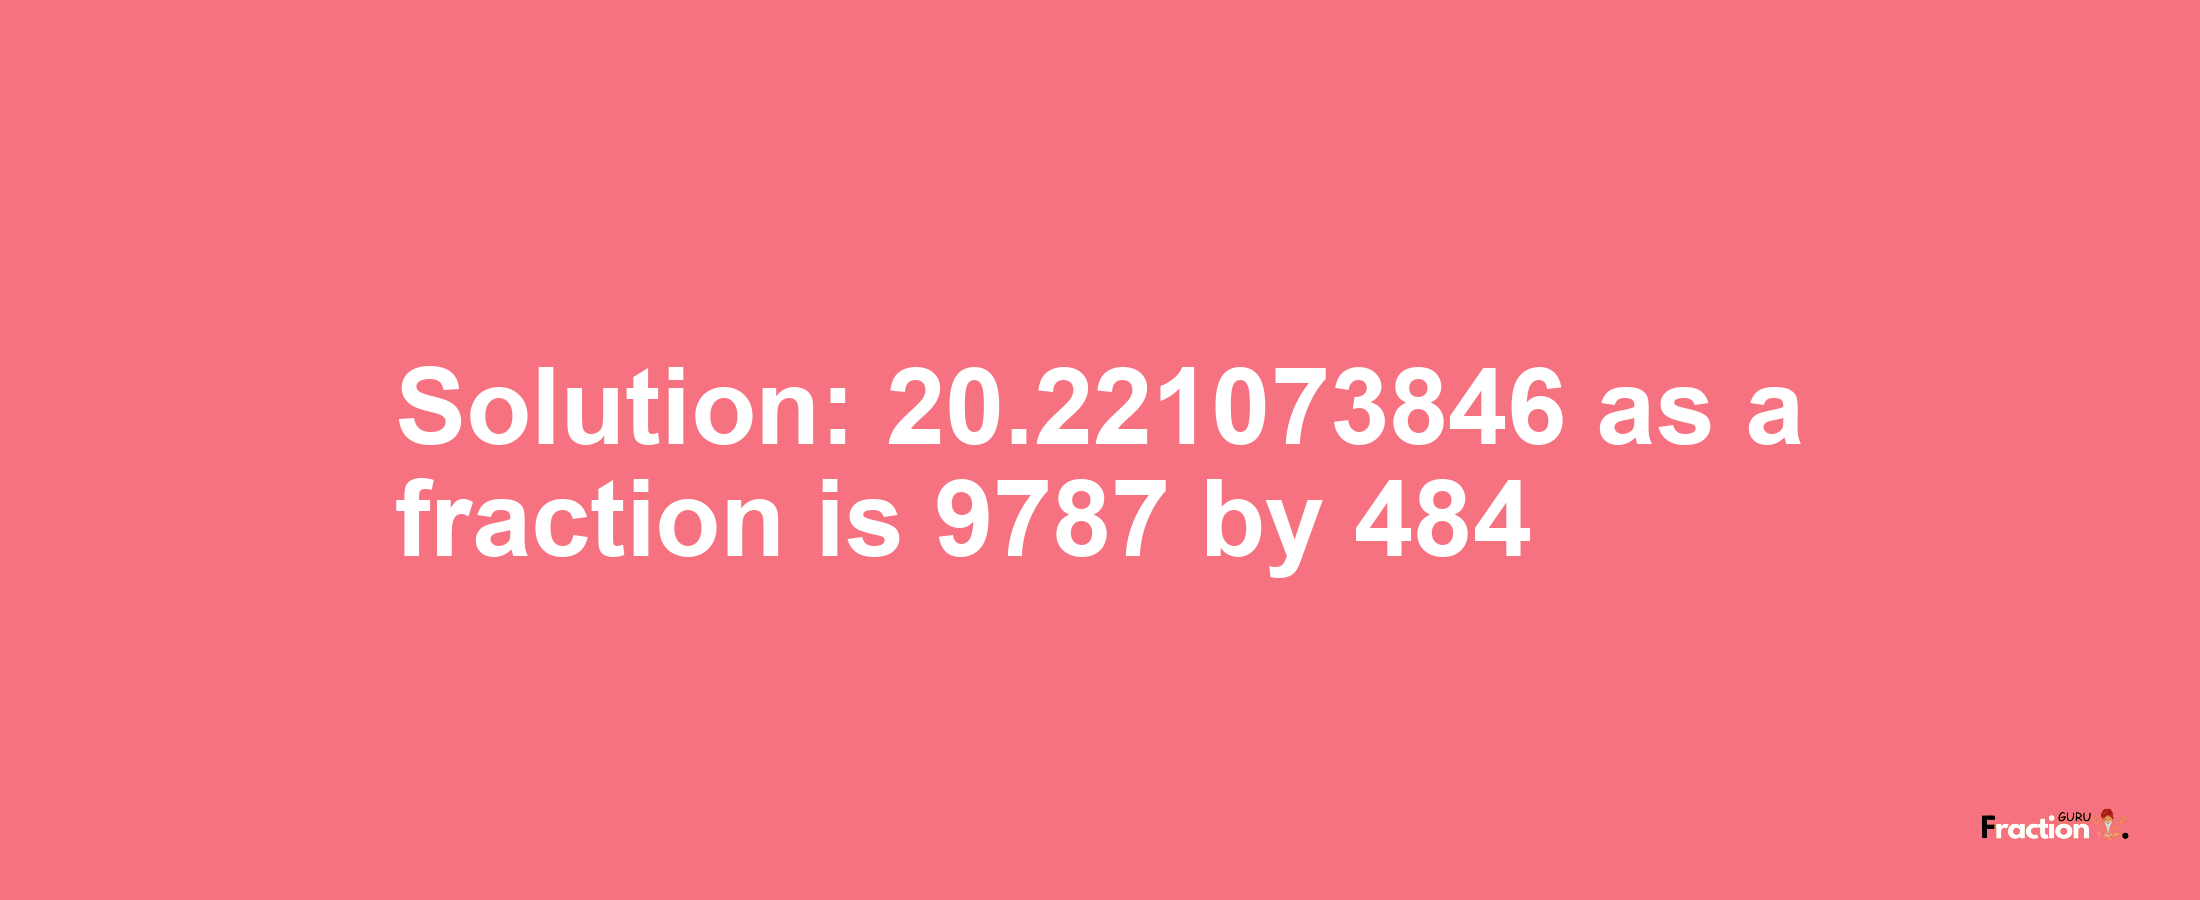 Solution:20.221073846 as a fraction is 9787/484